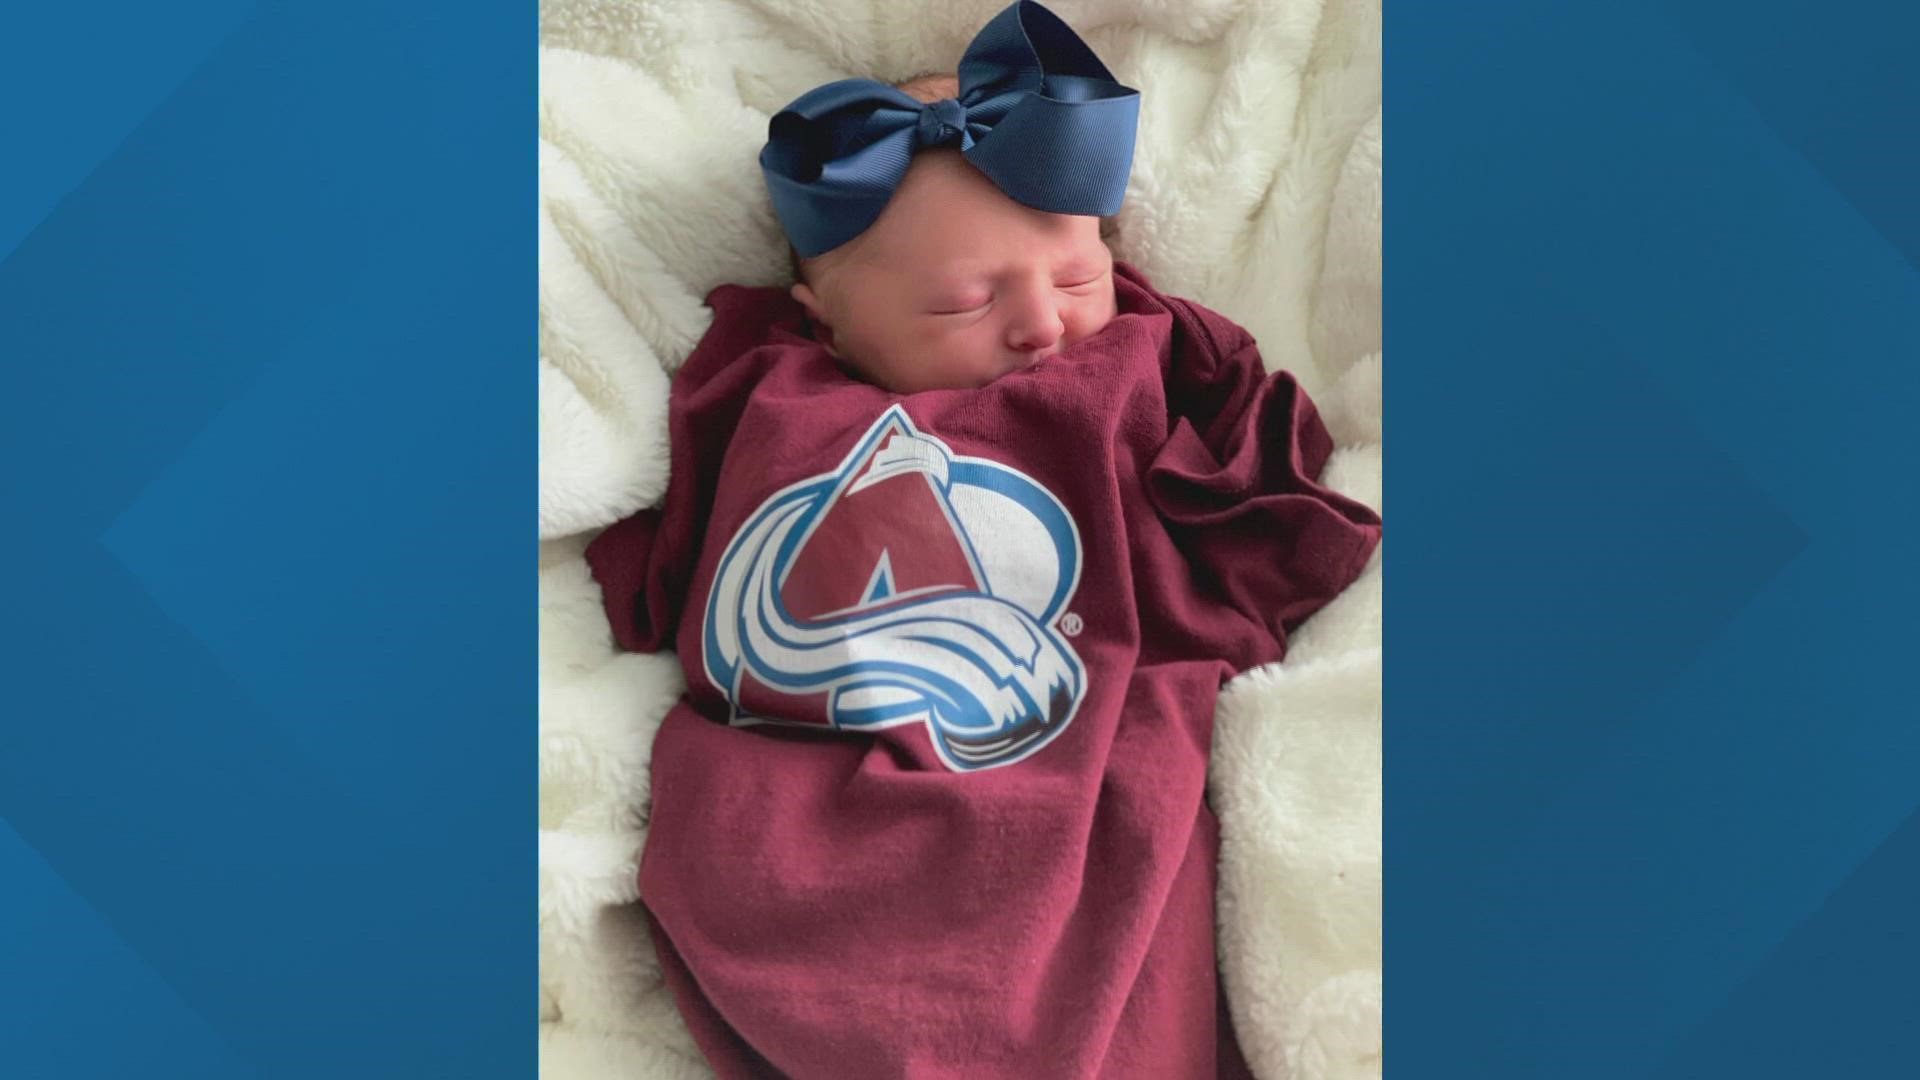 The Avs got an extra cheerleader for game 2 and the rest of the Stanley Cup Final.